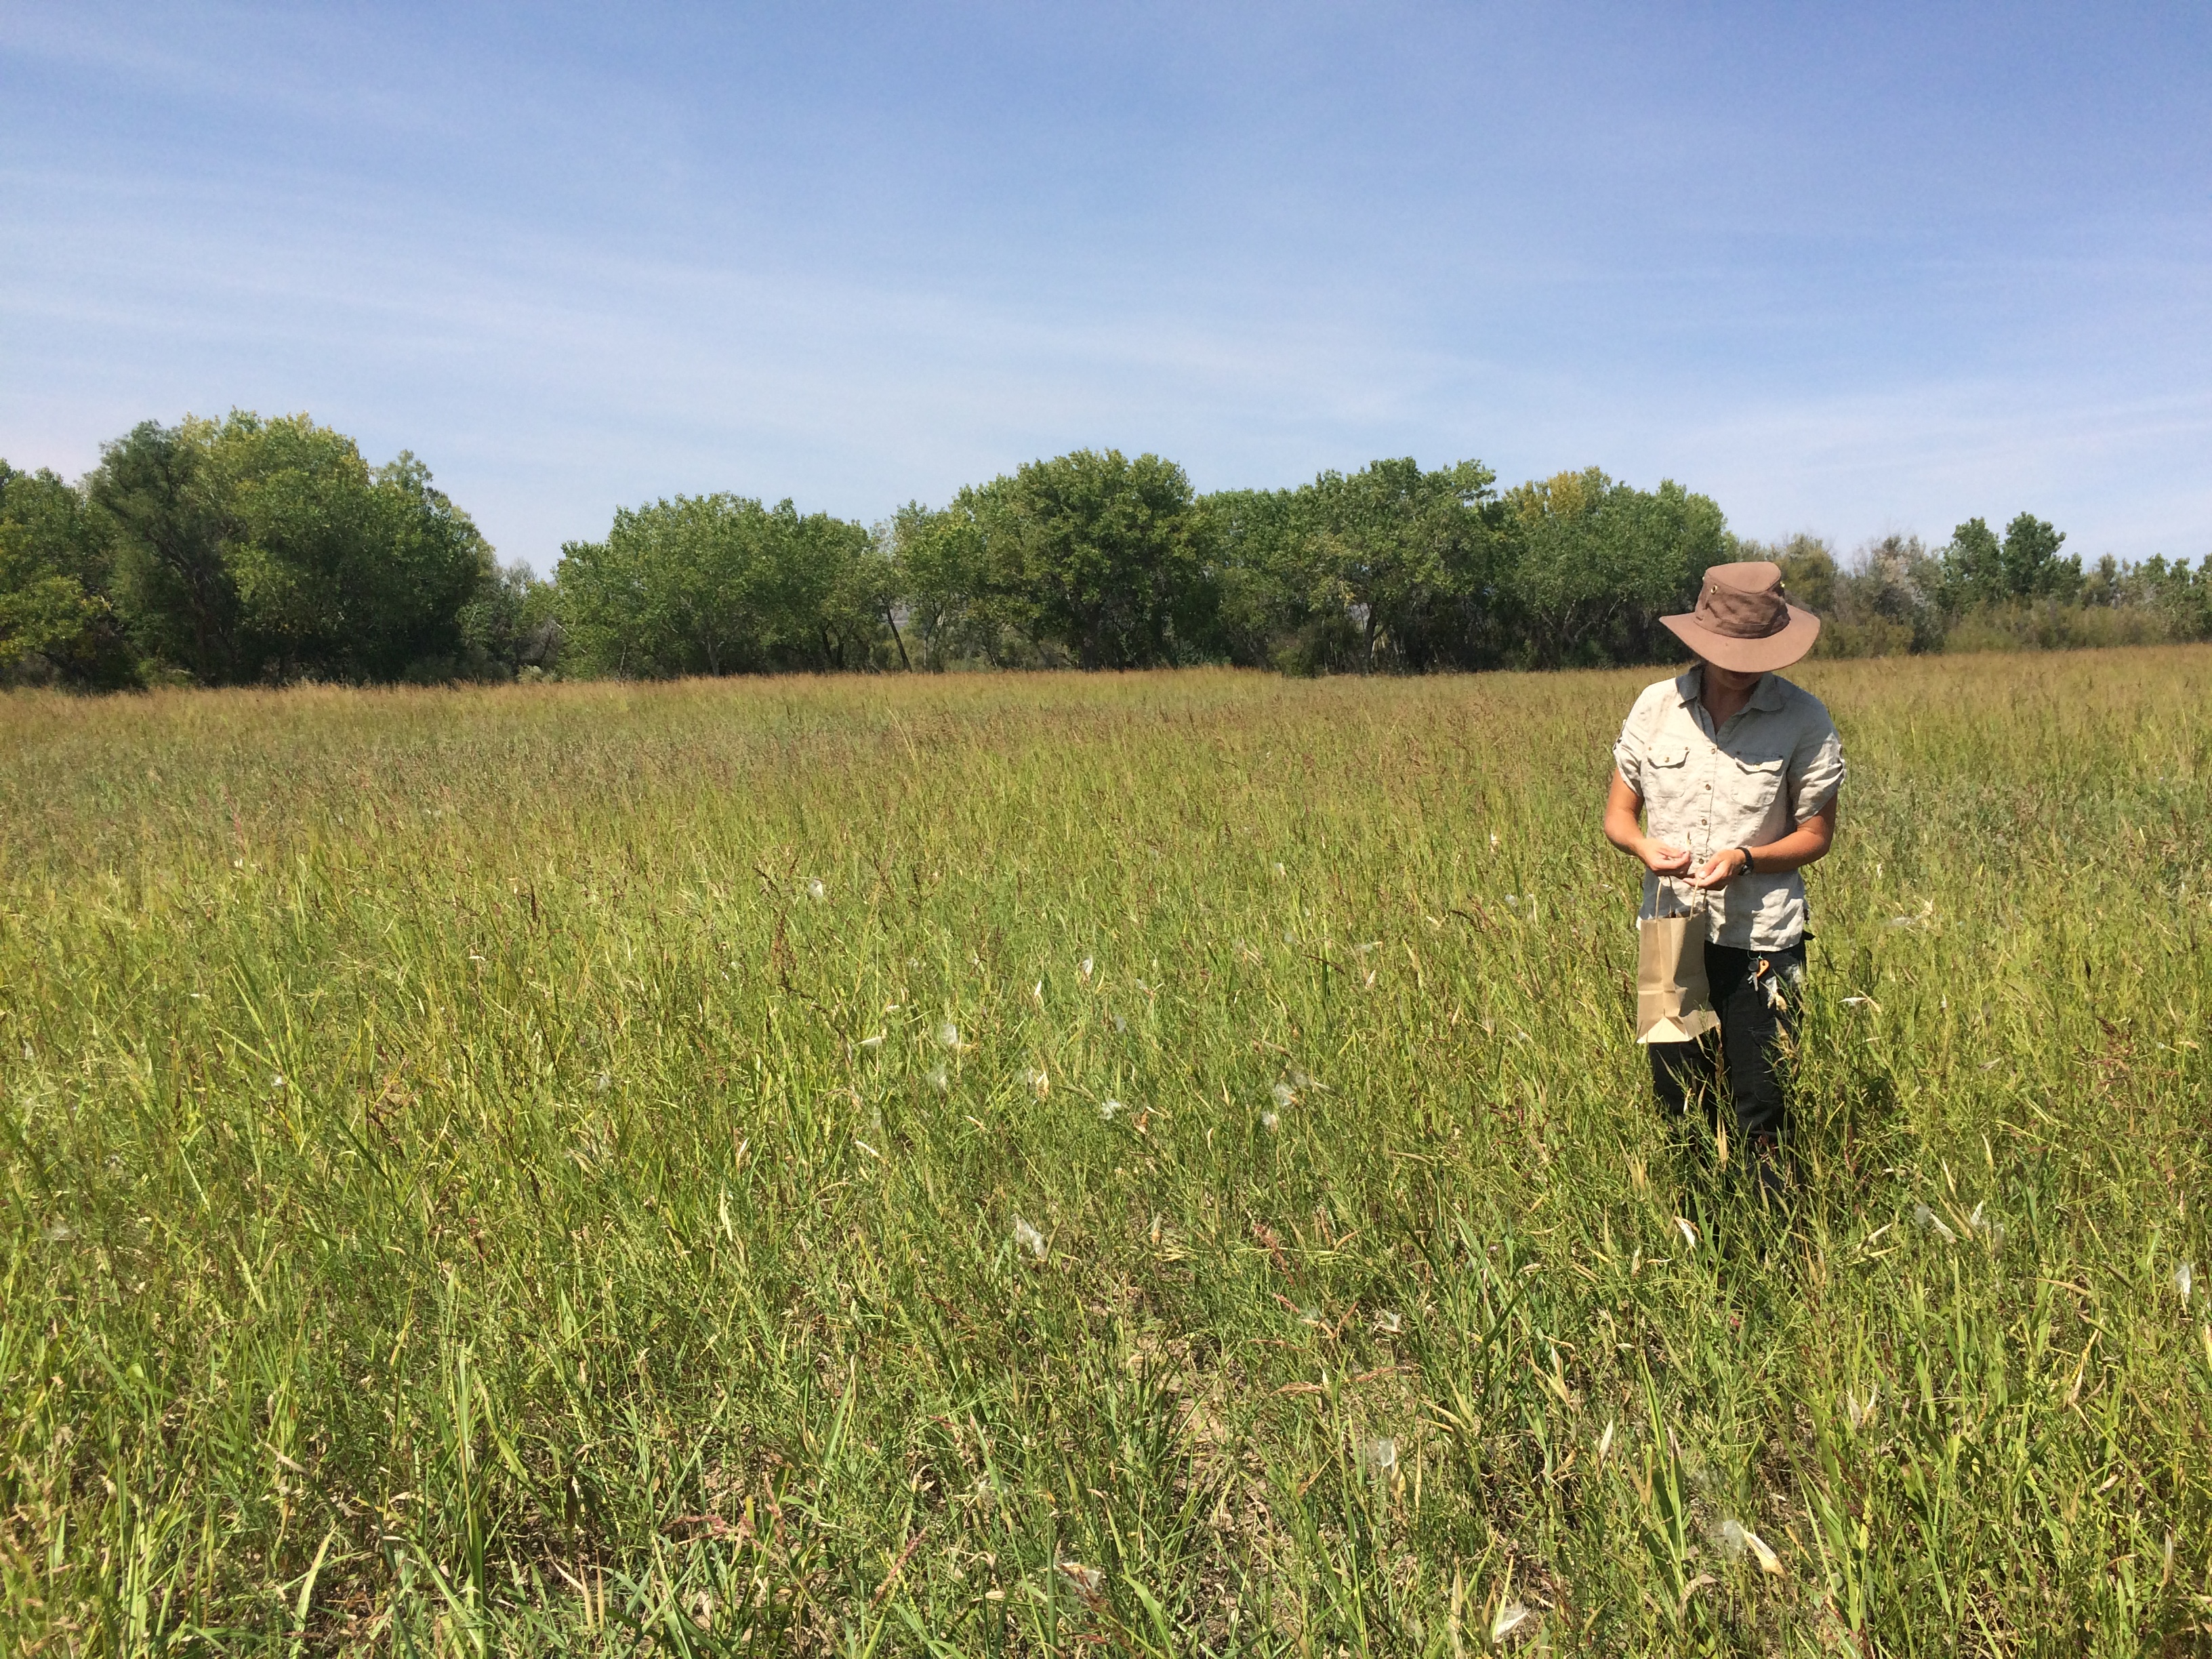 Person collecting native seed from grassland